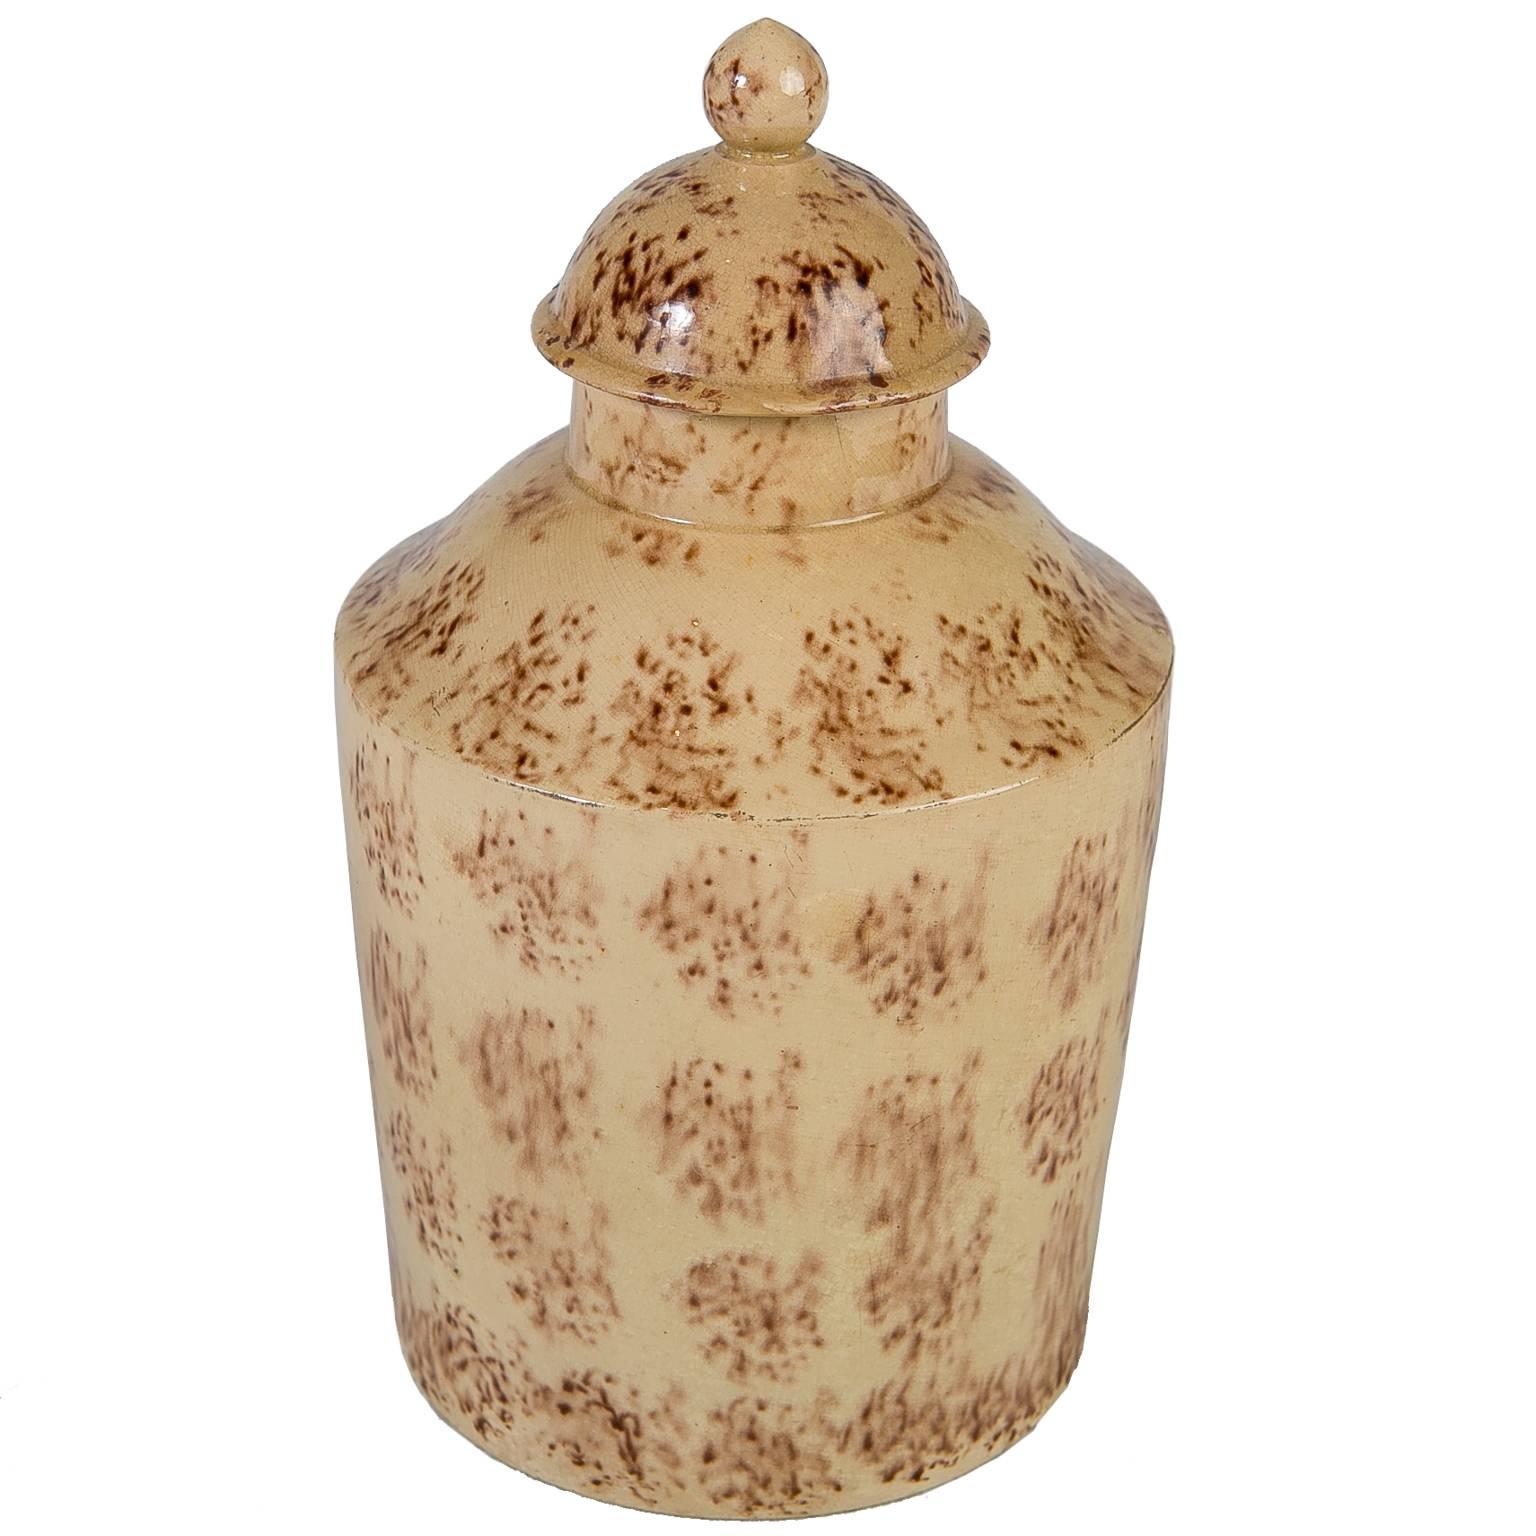 Antique Creamware Tea Caddy with Sponged Decoration